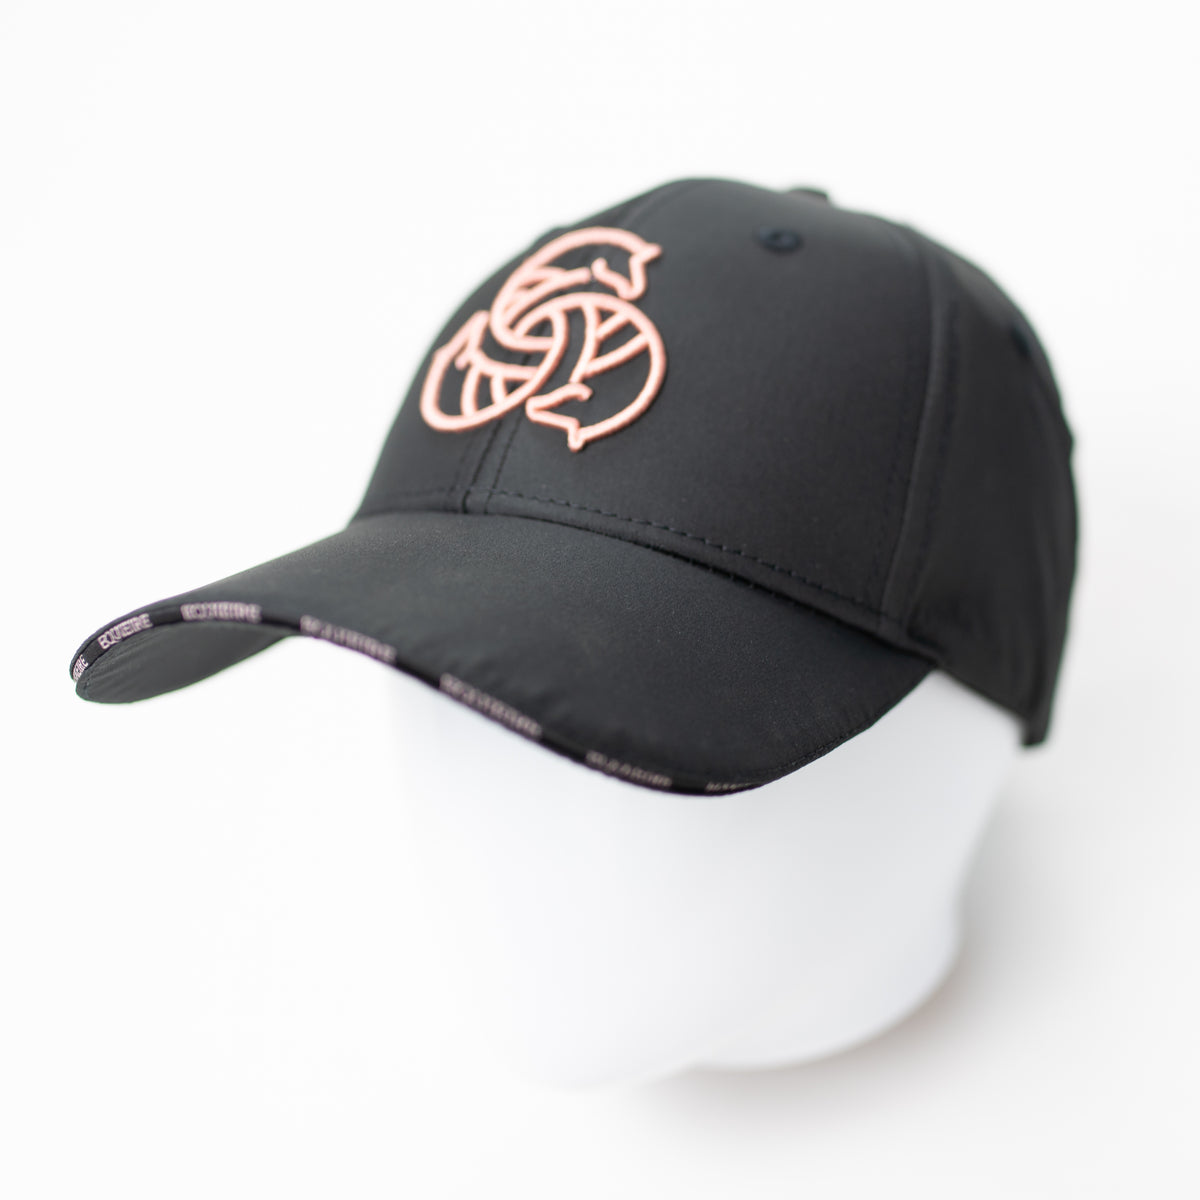 RAVEN Gold | Limited Edition Equestrian Sports Cap